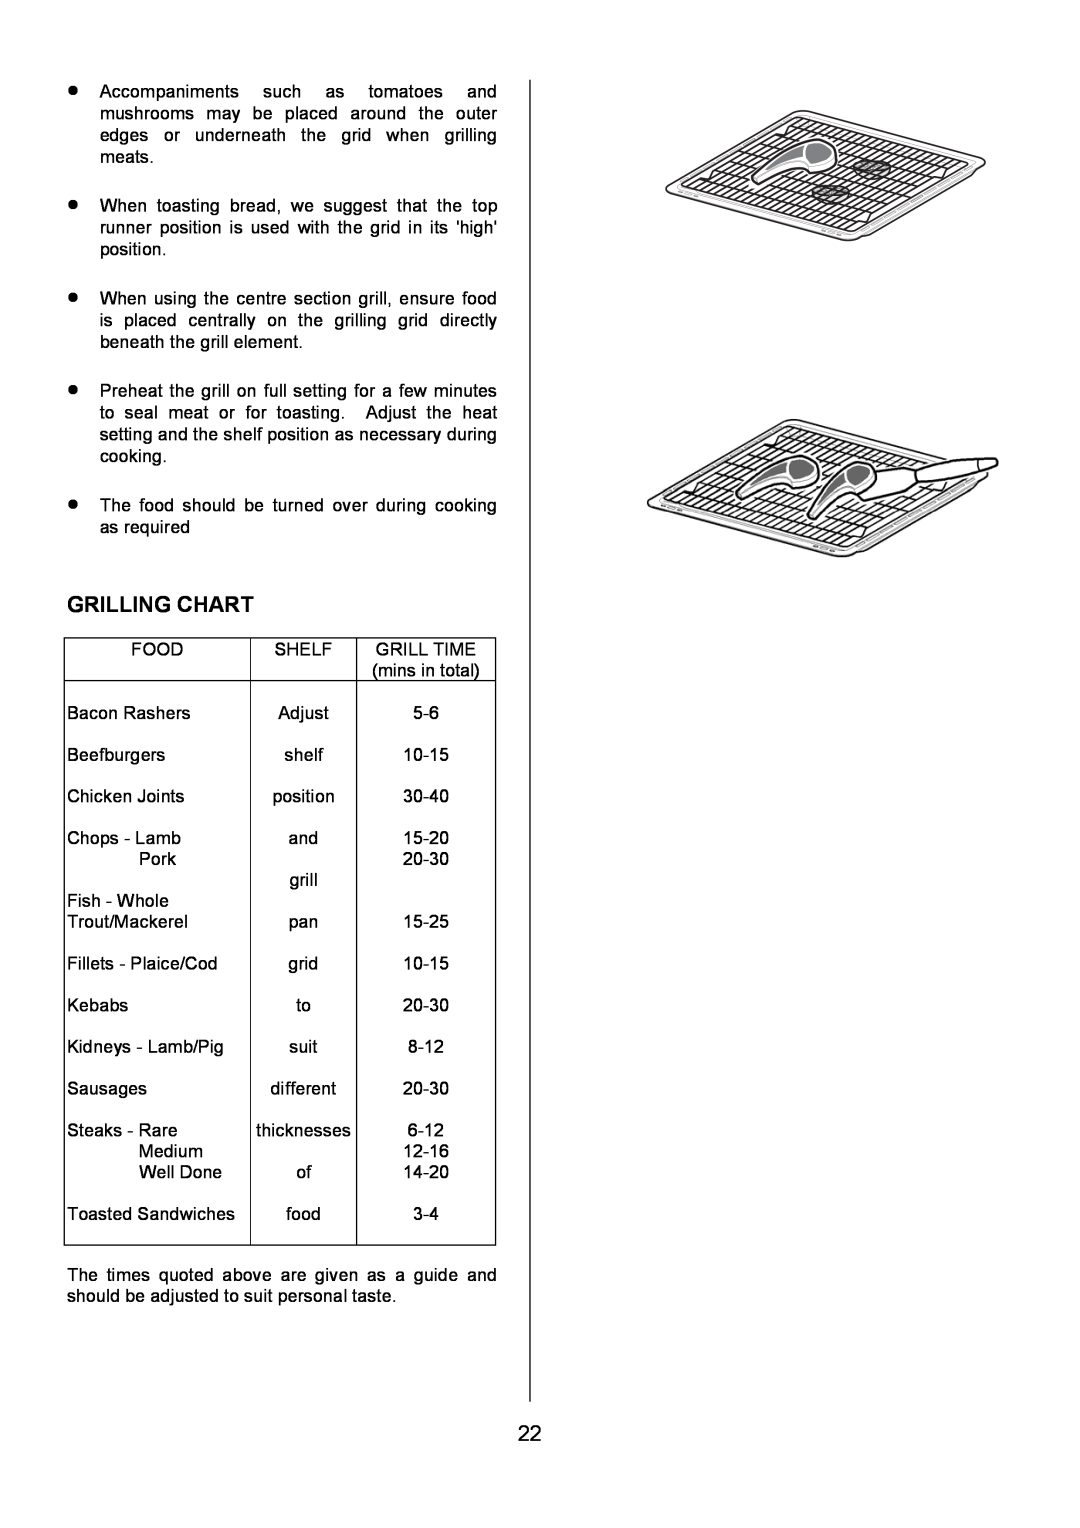 Electrolux U7101-4 operating instructions Grilling Chart 